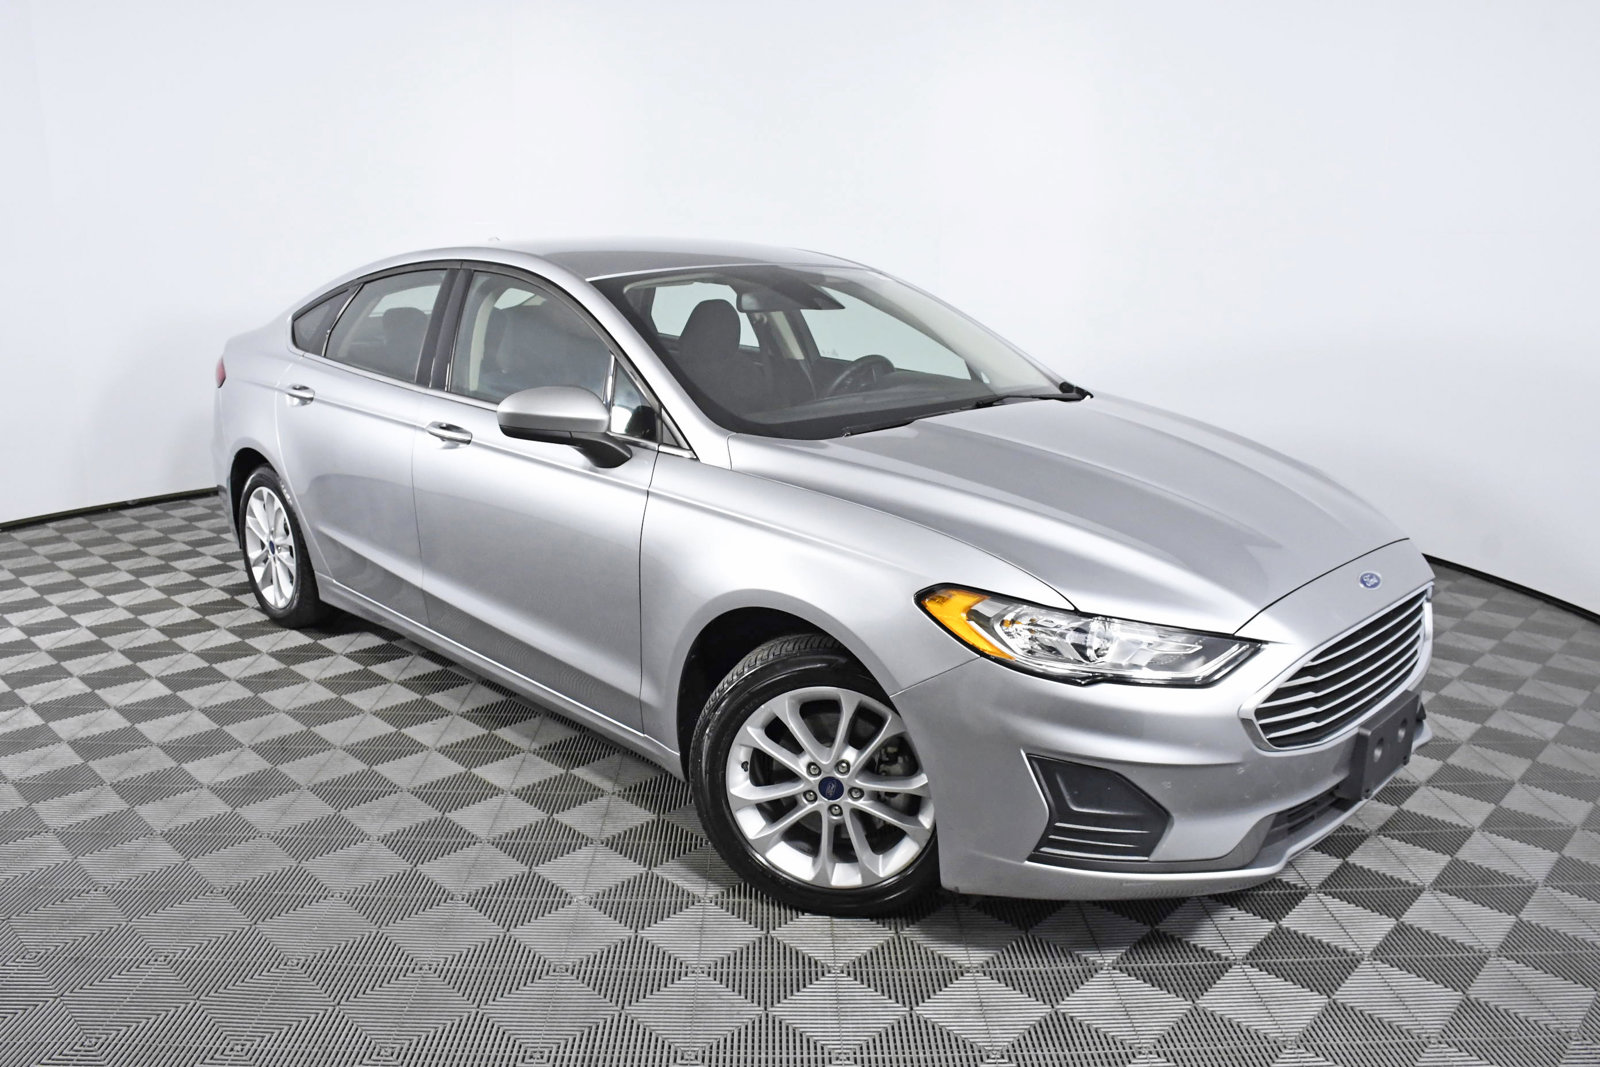 Pre-Owned 2020 Ford Fusion Hybrid SE 4dr Car in Palmetto Bay #R212064 |  HGreg Nissan Kendall